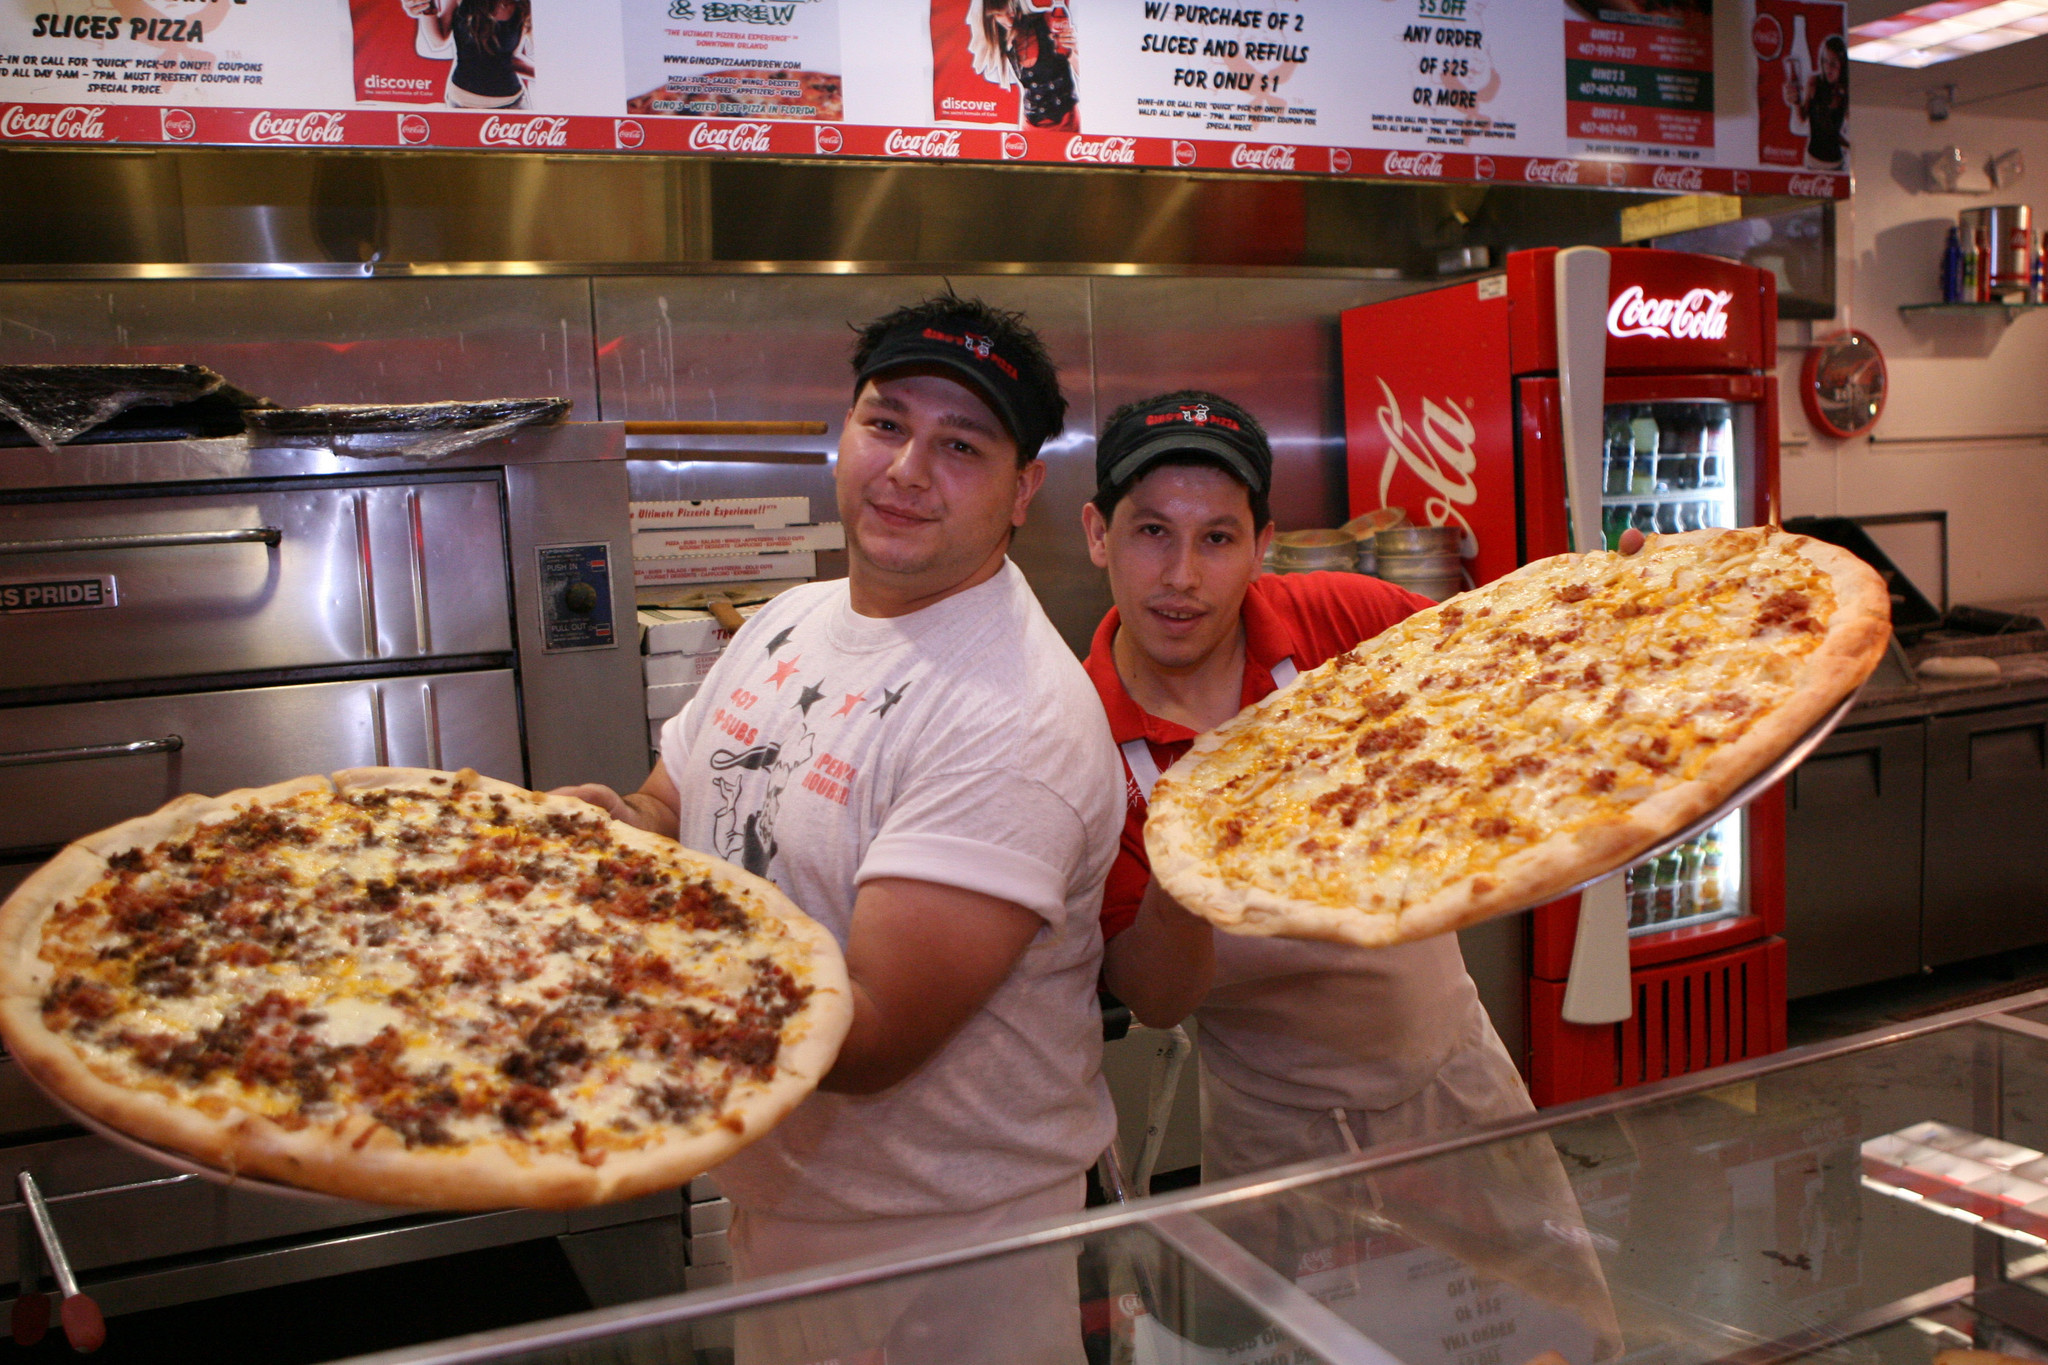 orlando restaurant news: Gino's Pizza & Brew closing after more than 15 years in downtown ...